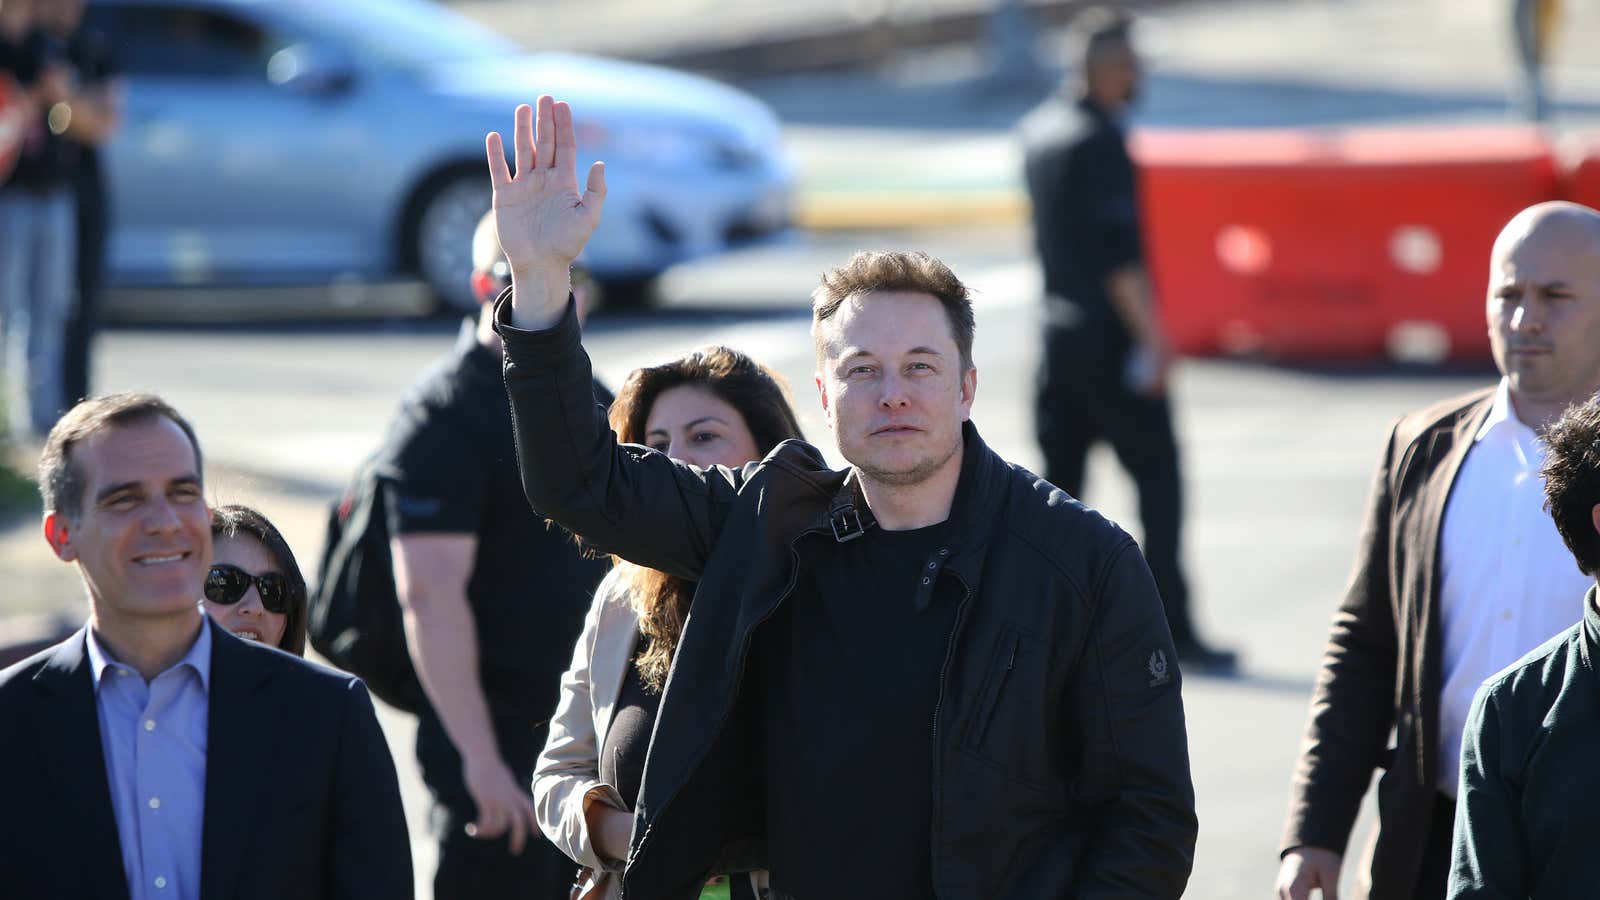 South African-born Elon Musk’s SpaceX is valued at $12 billion.